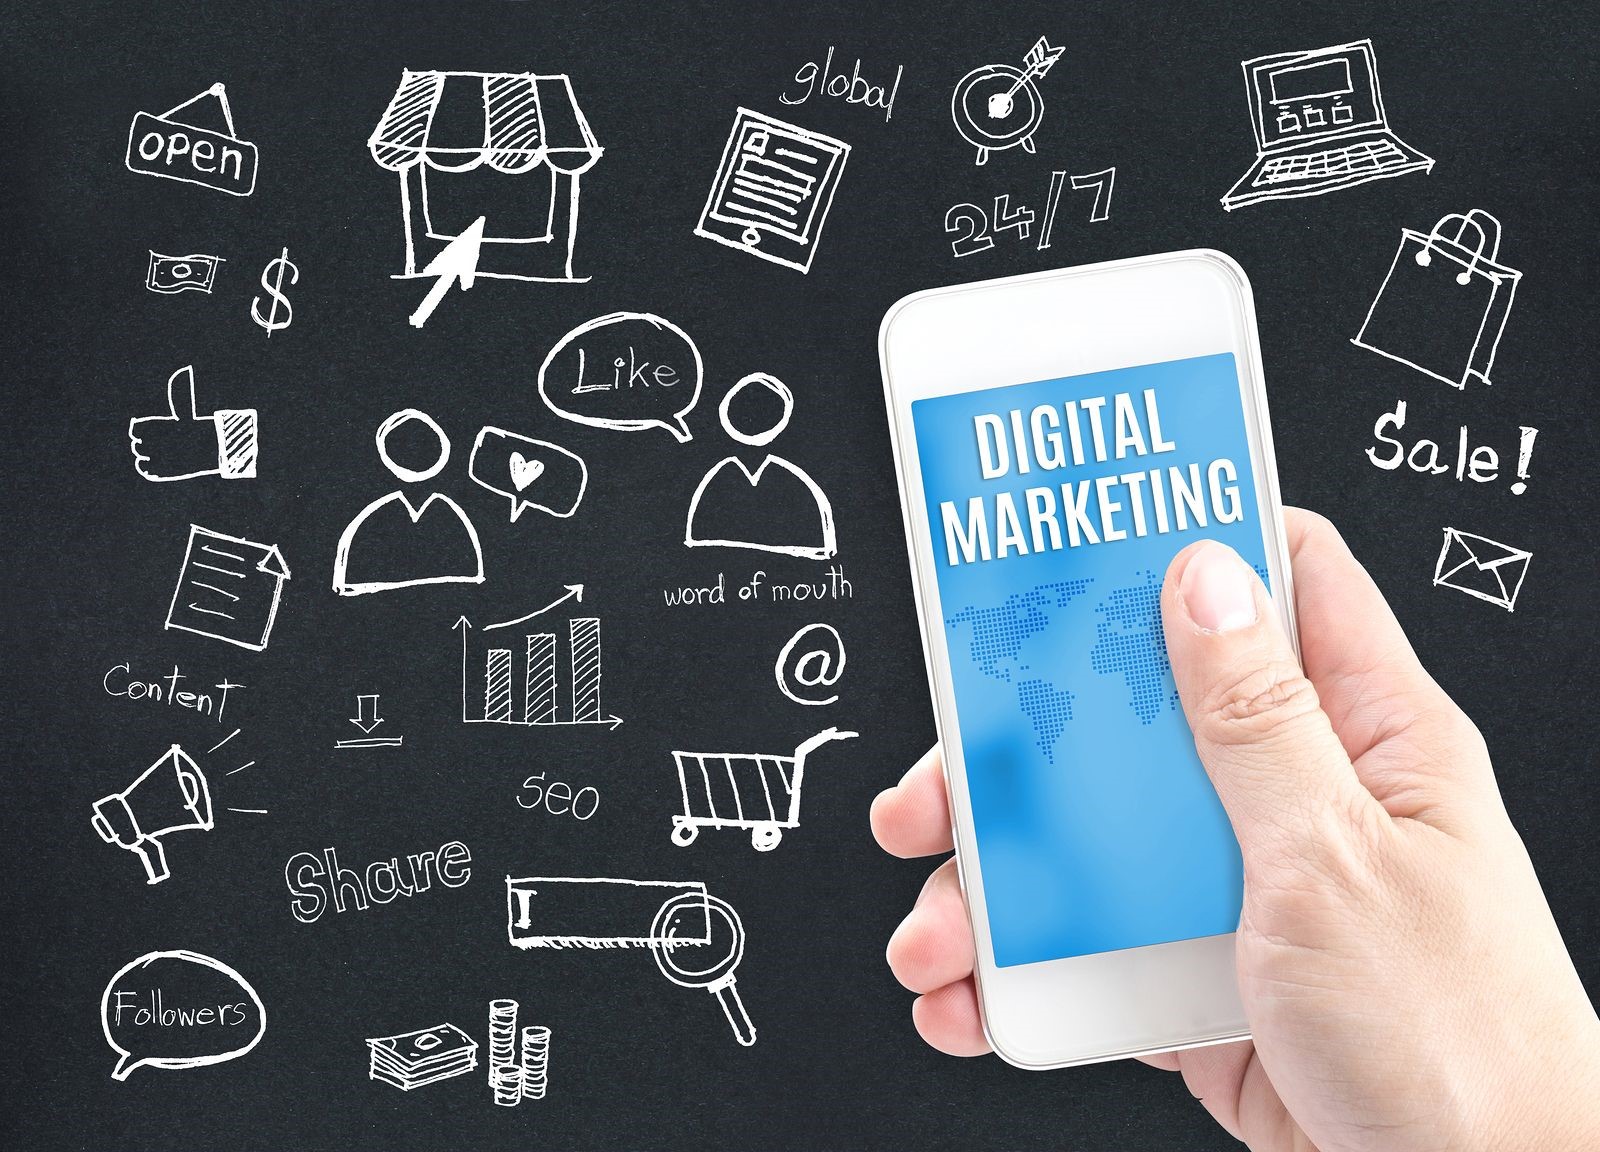 Digital Marketing Consulting is a Sure Way To Get Your Business Seen